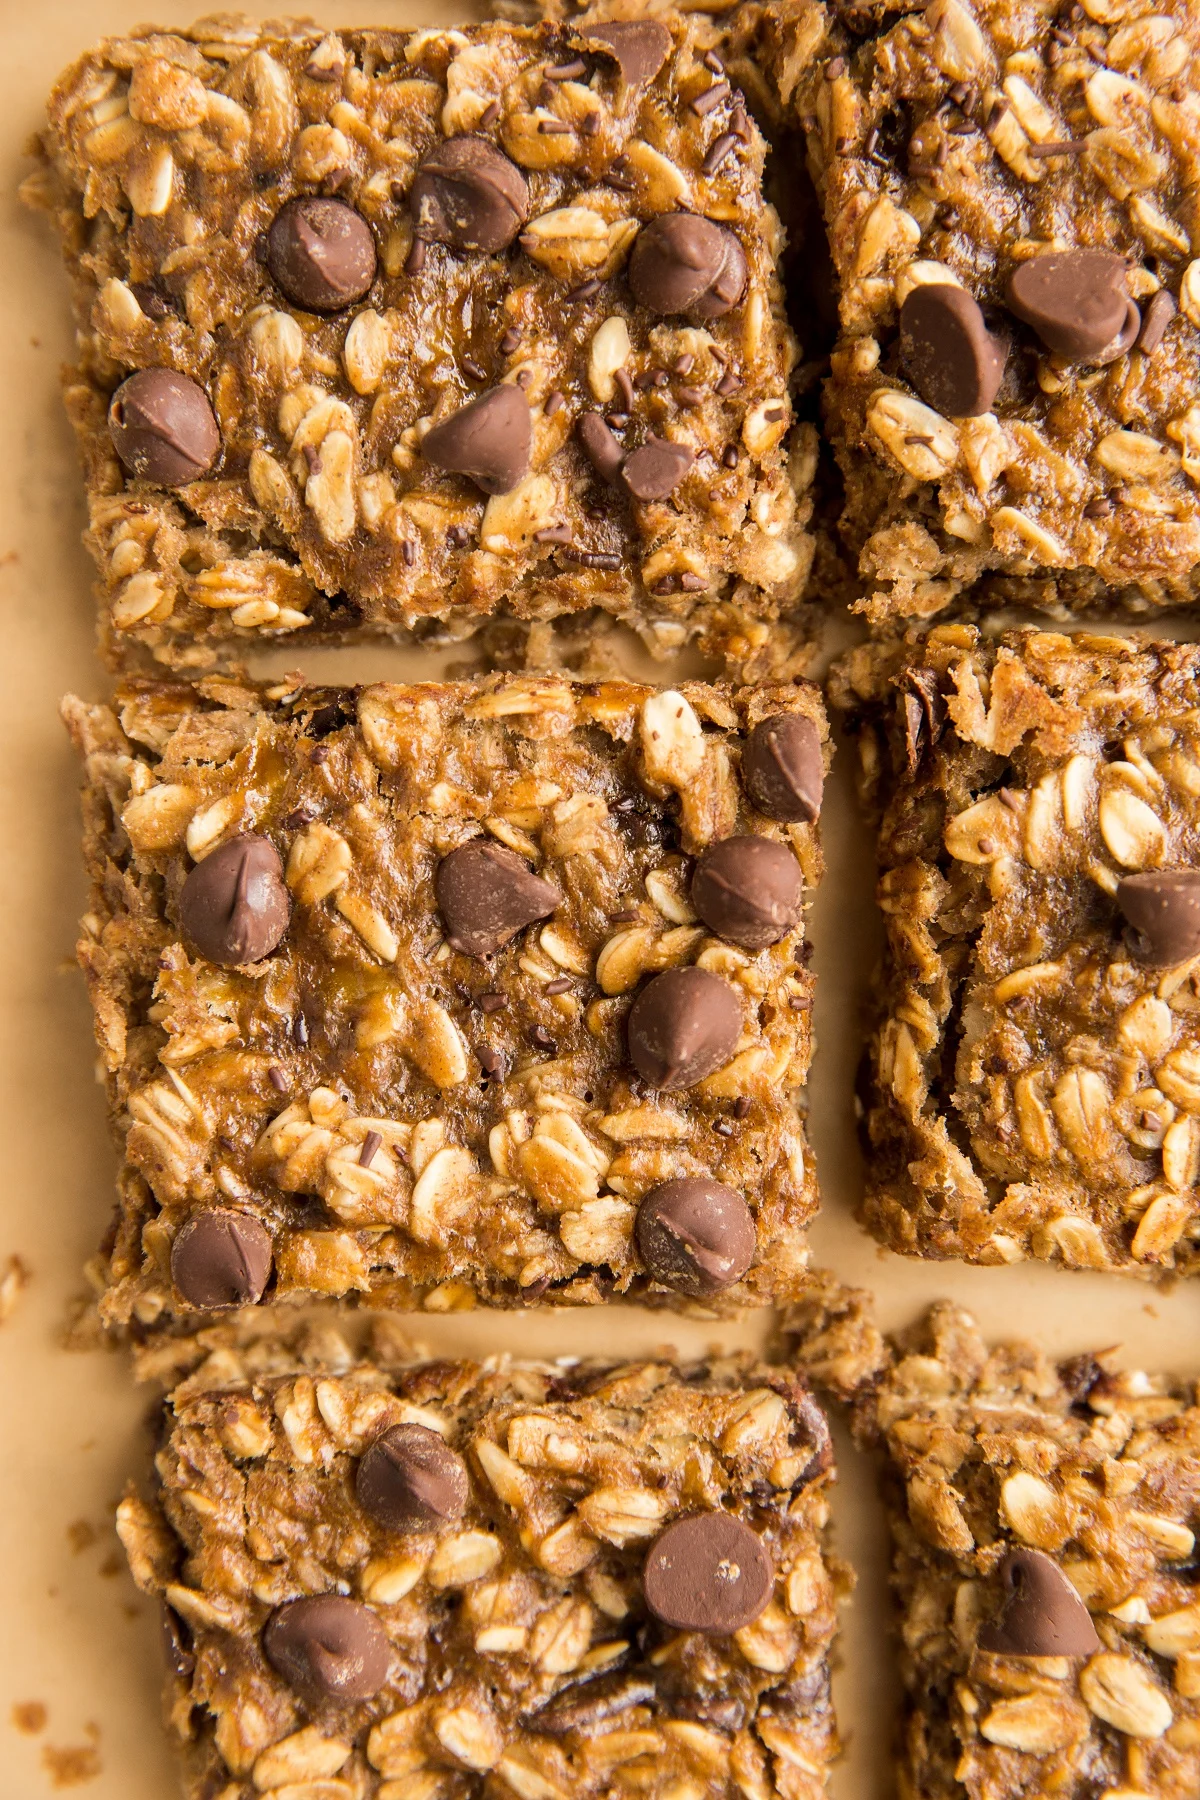 Slices of Oatmeal Bars on a sheet of parchment paper, ready to eat.